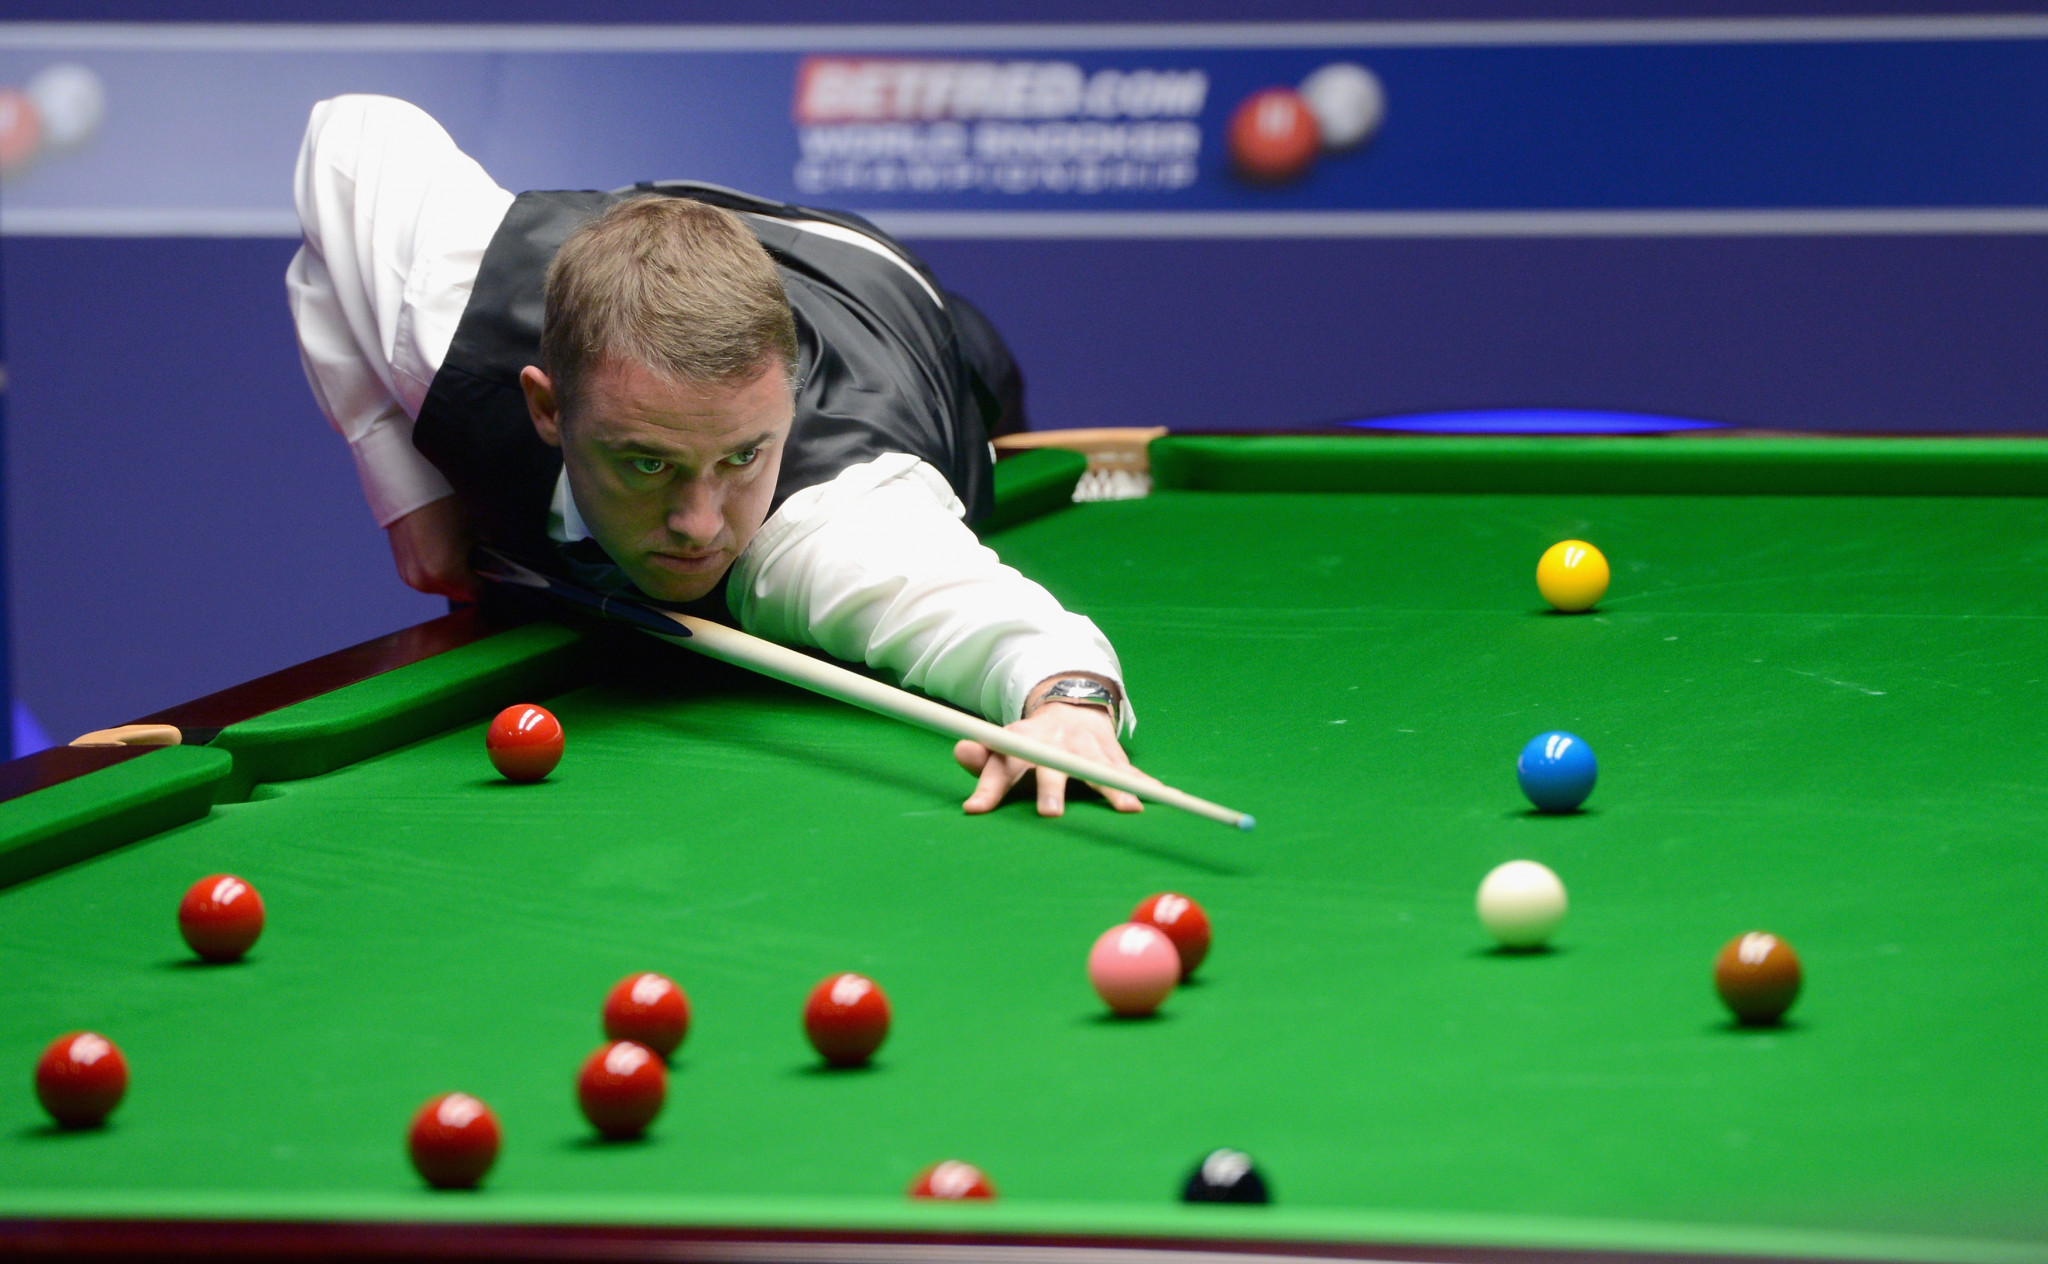 Snooker great Hendry eyes Crucible return as he comes out of retirement